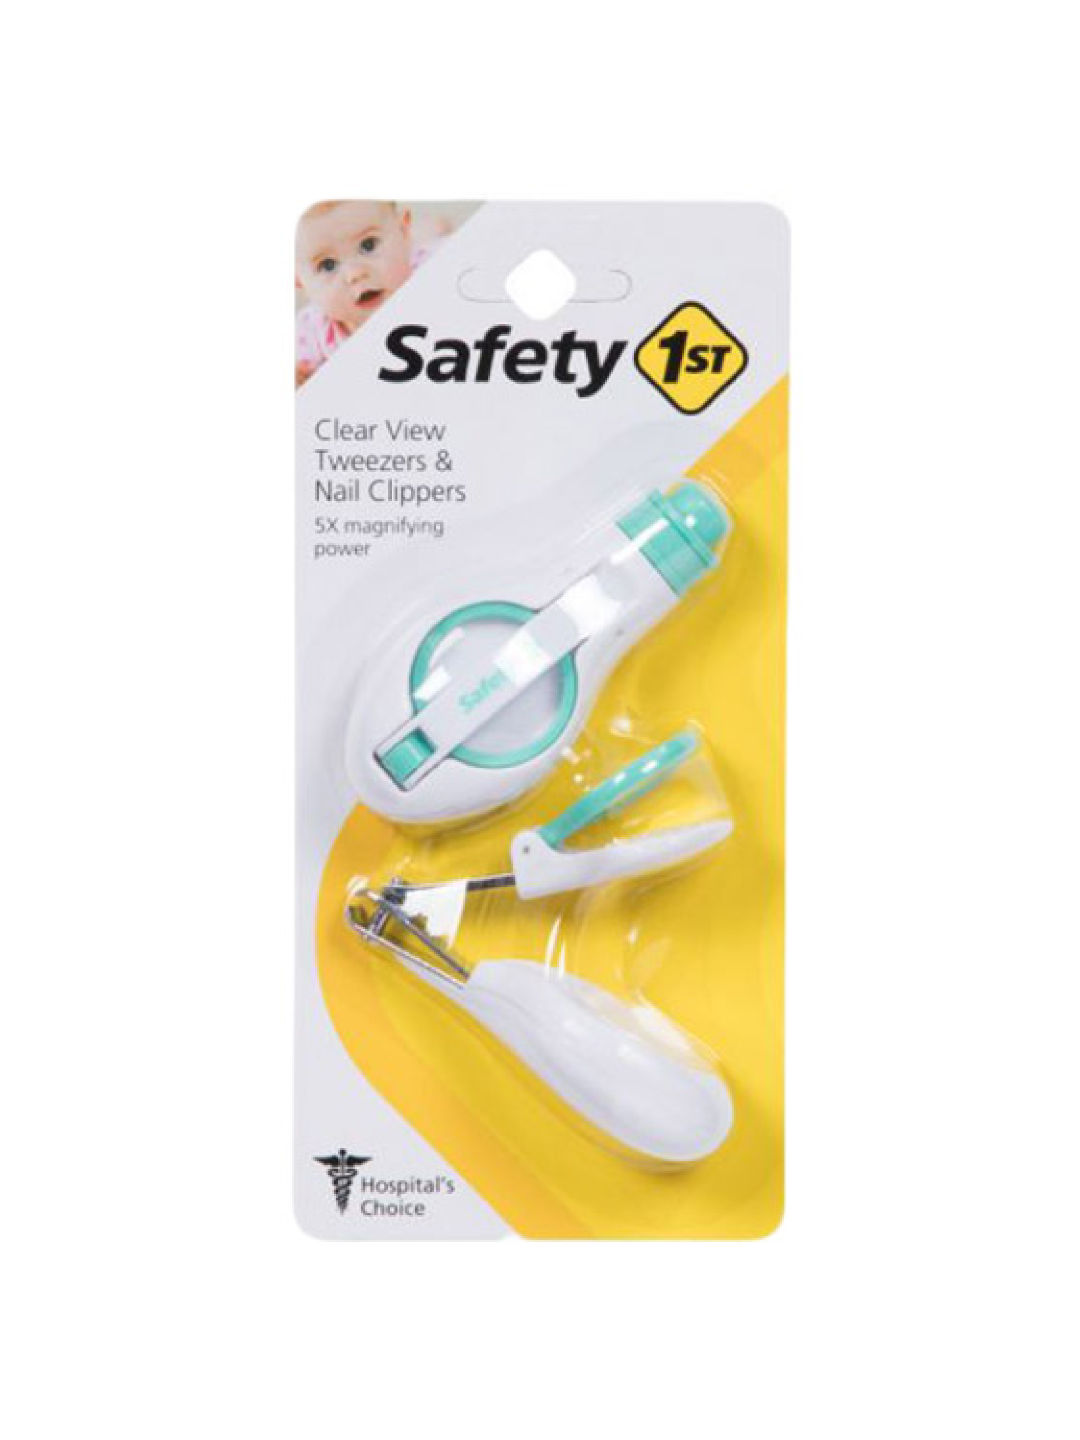 Safety 1st Clearview Nail Clipper/Tweezer (Blue- Image 2)